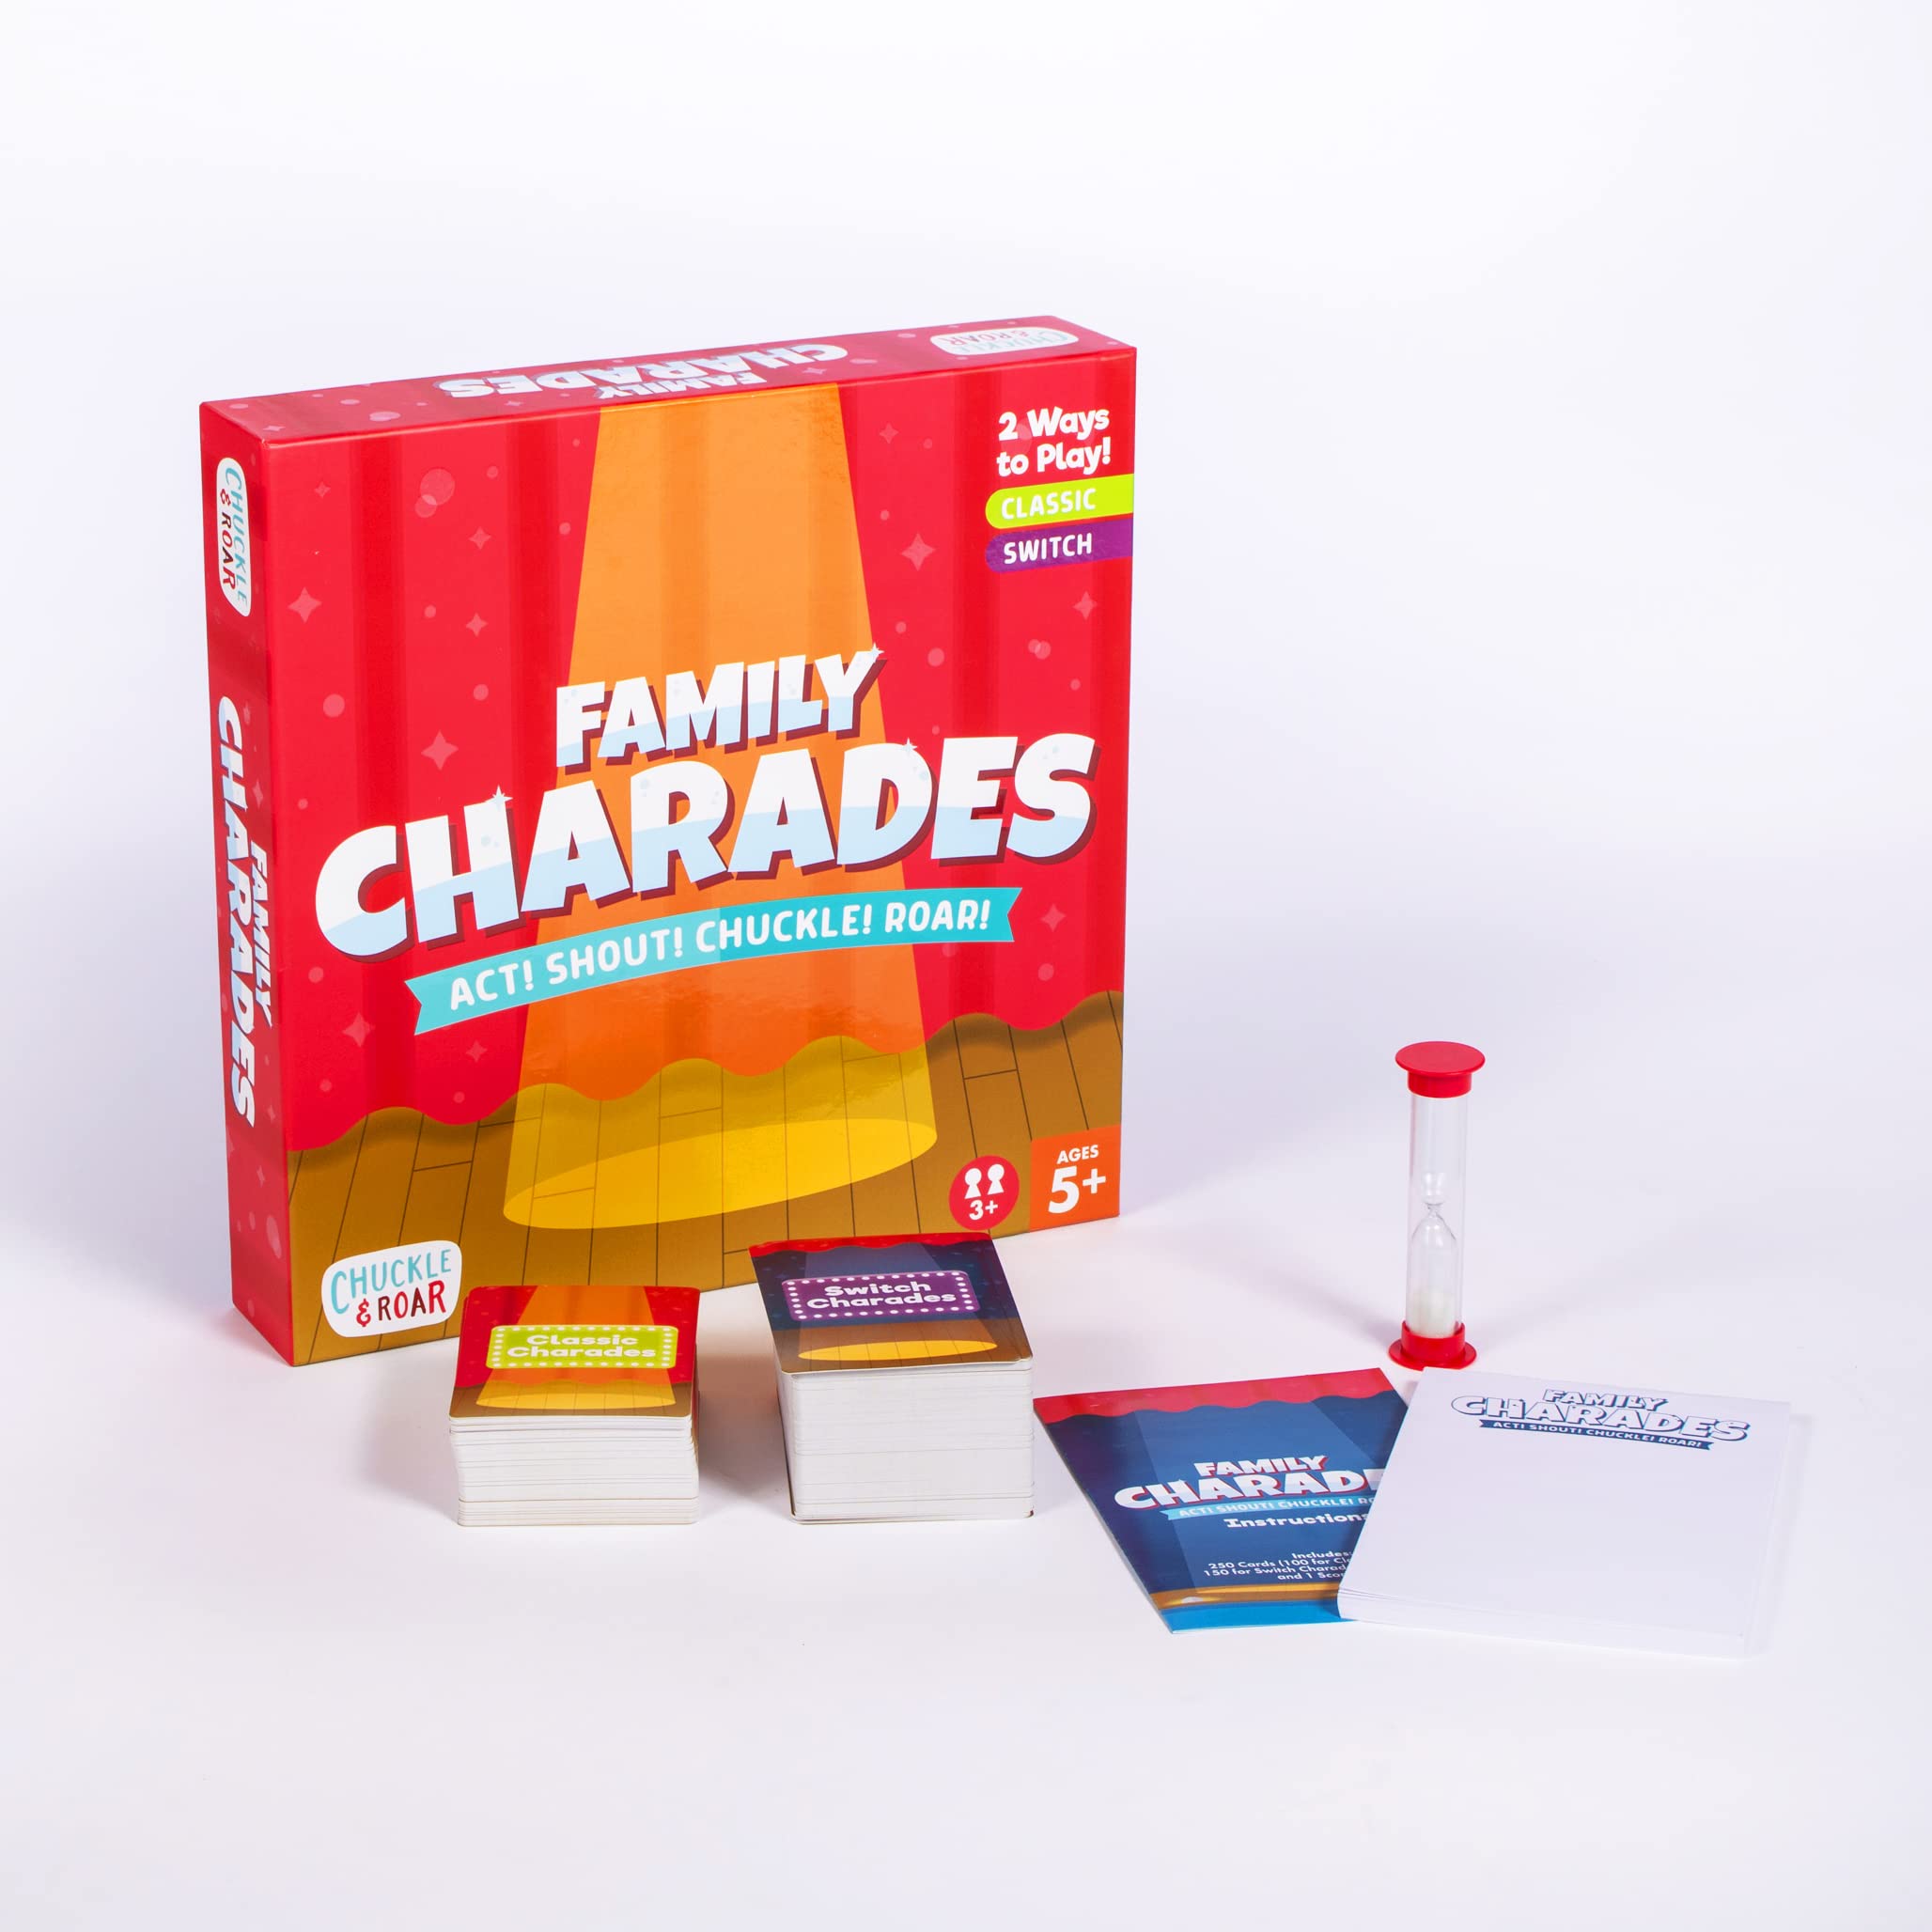 Chuckle & Roar - Family Charades - Family Game Night Classic - Switch charades for Group Acting - Great for Kids 5 and up